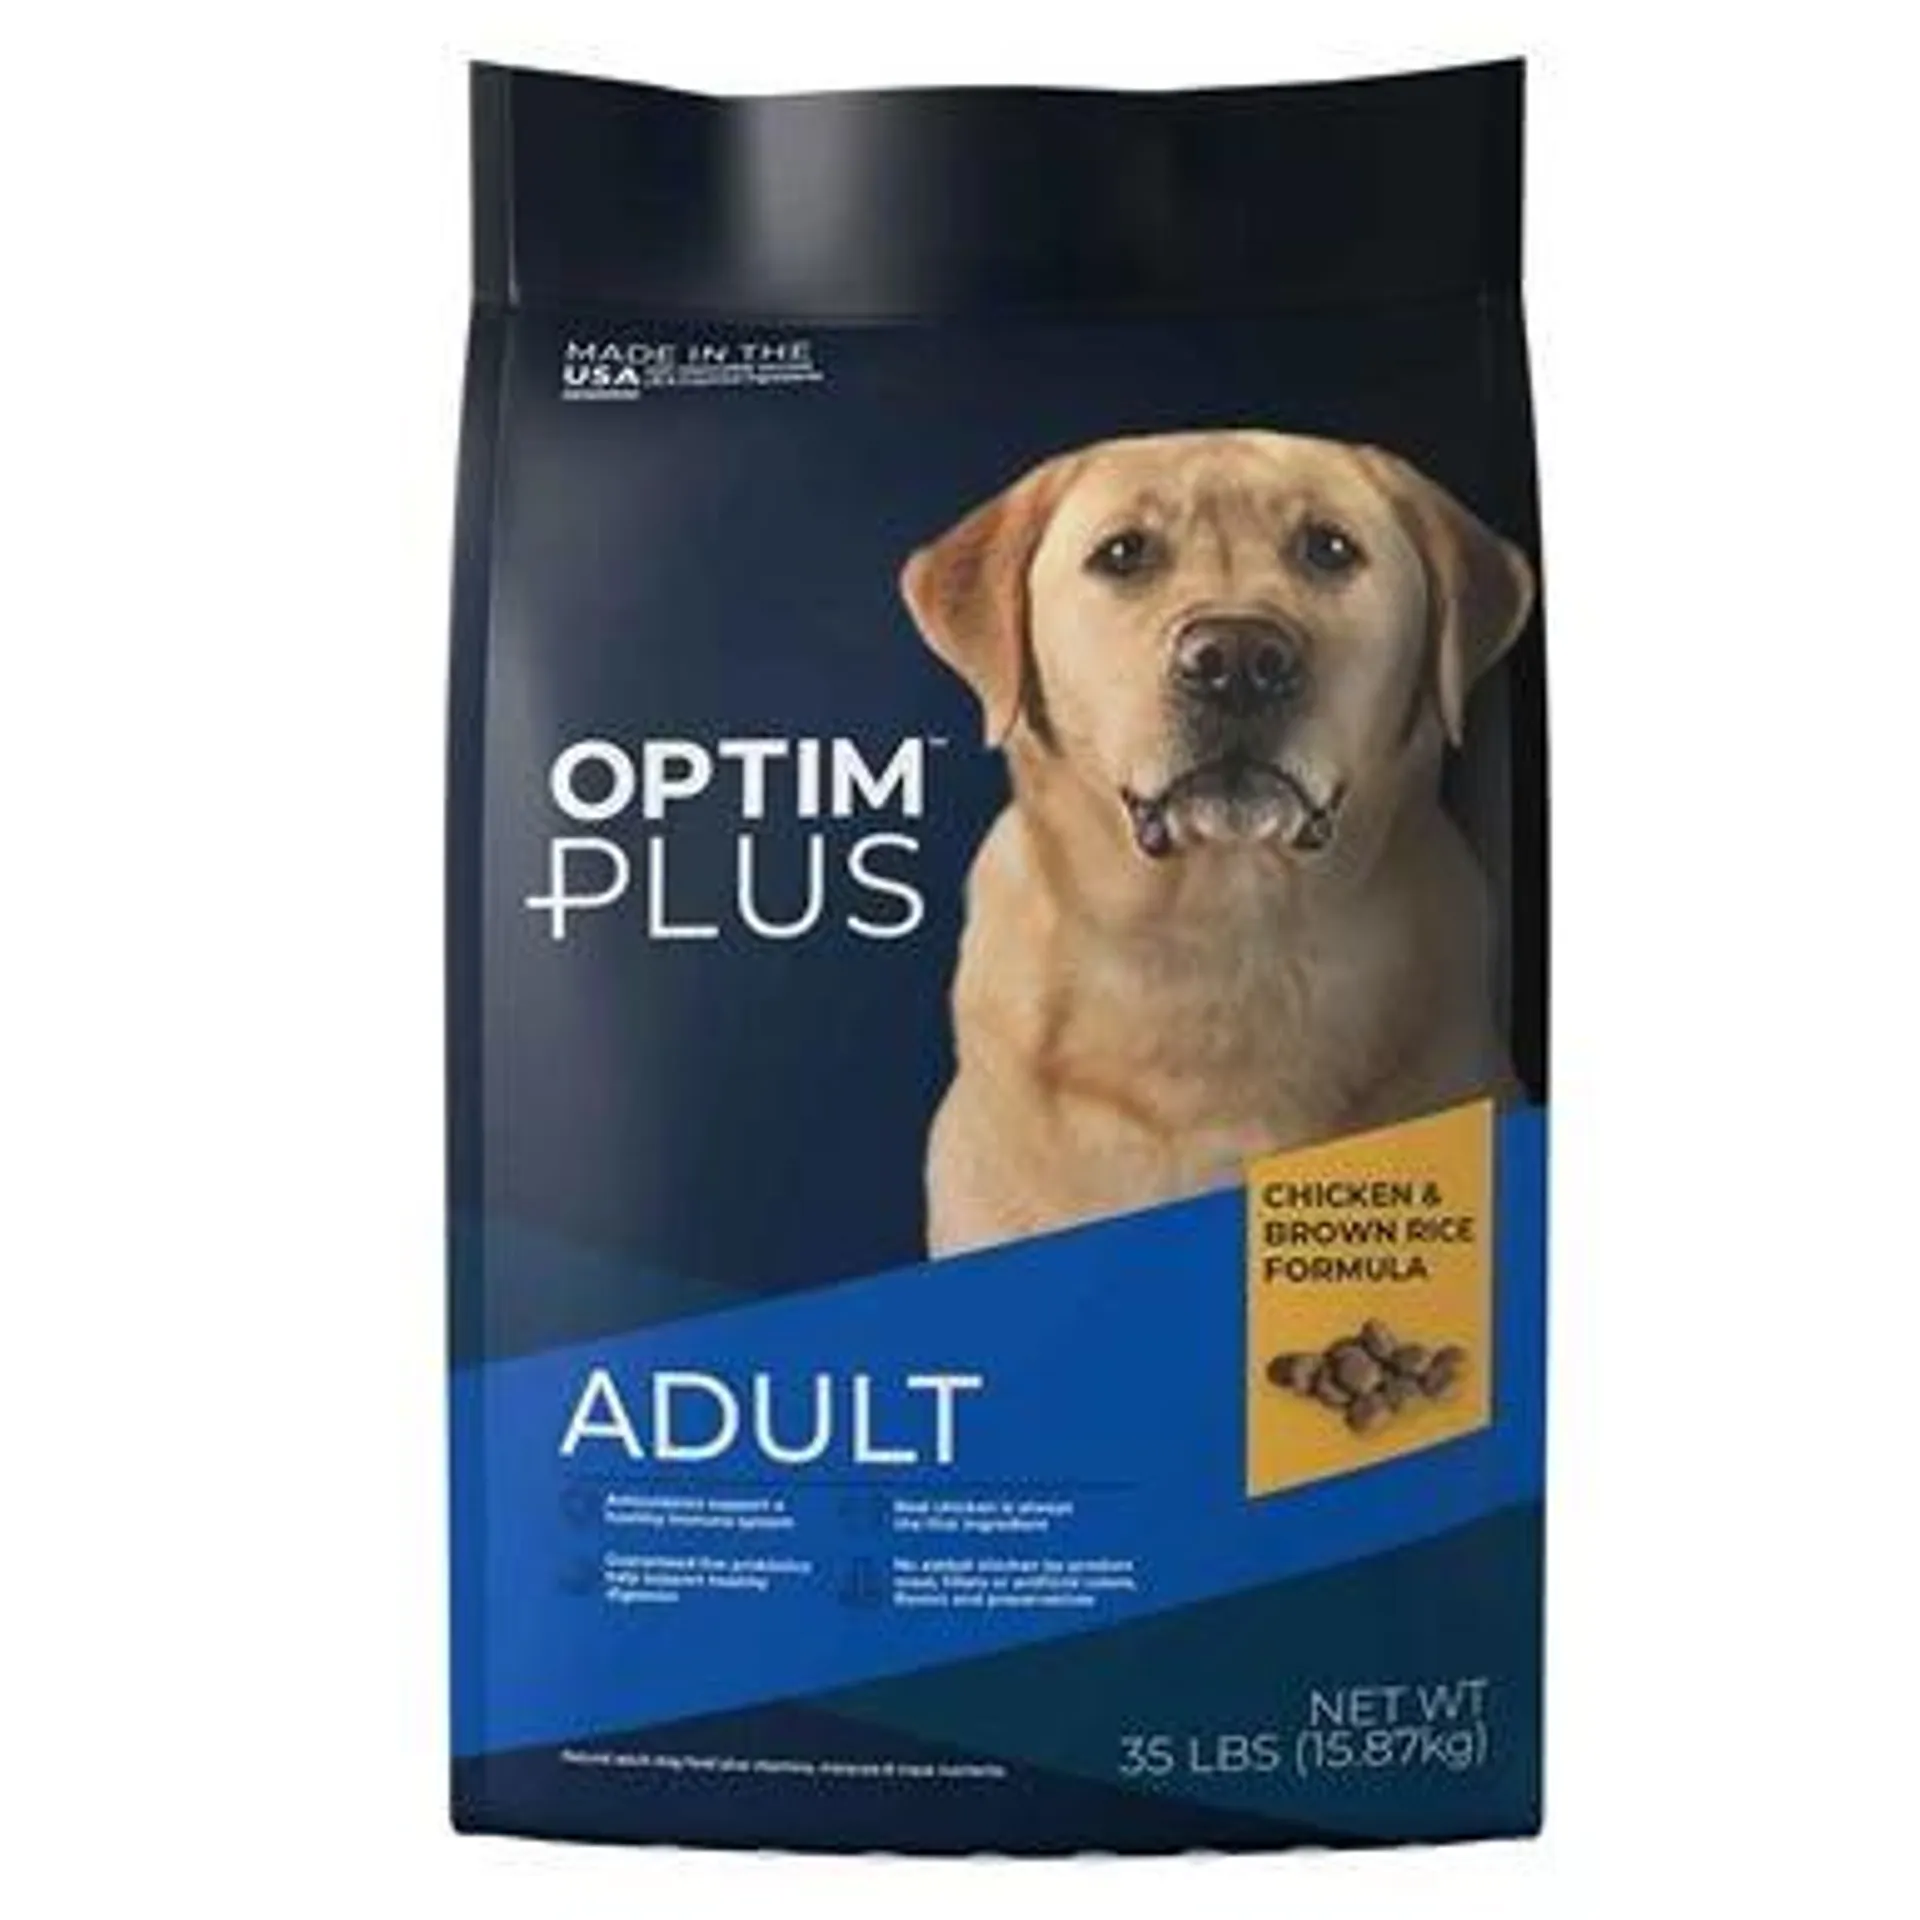 OptimPlus Adult Chicken & Brown Rice Formula Dry Dog Food, 35 Pounds